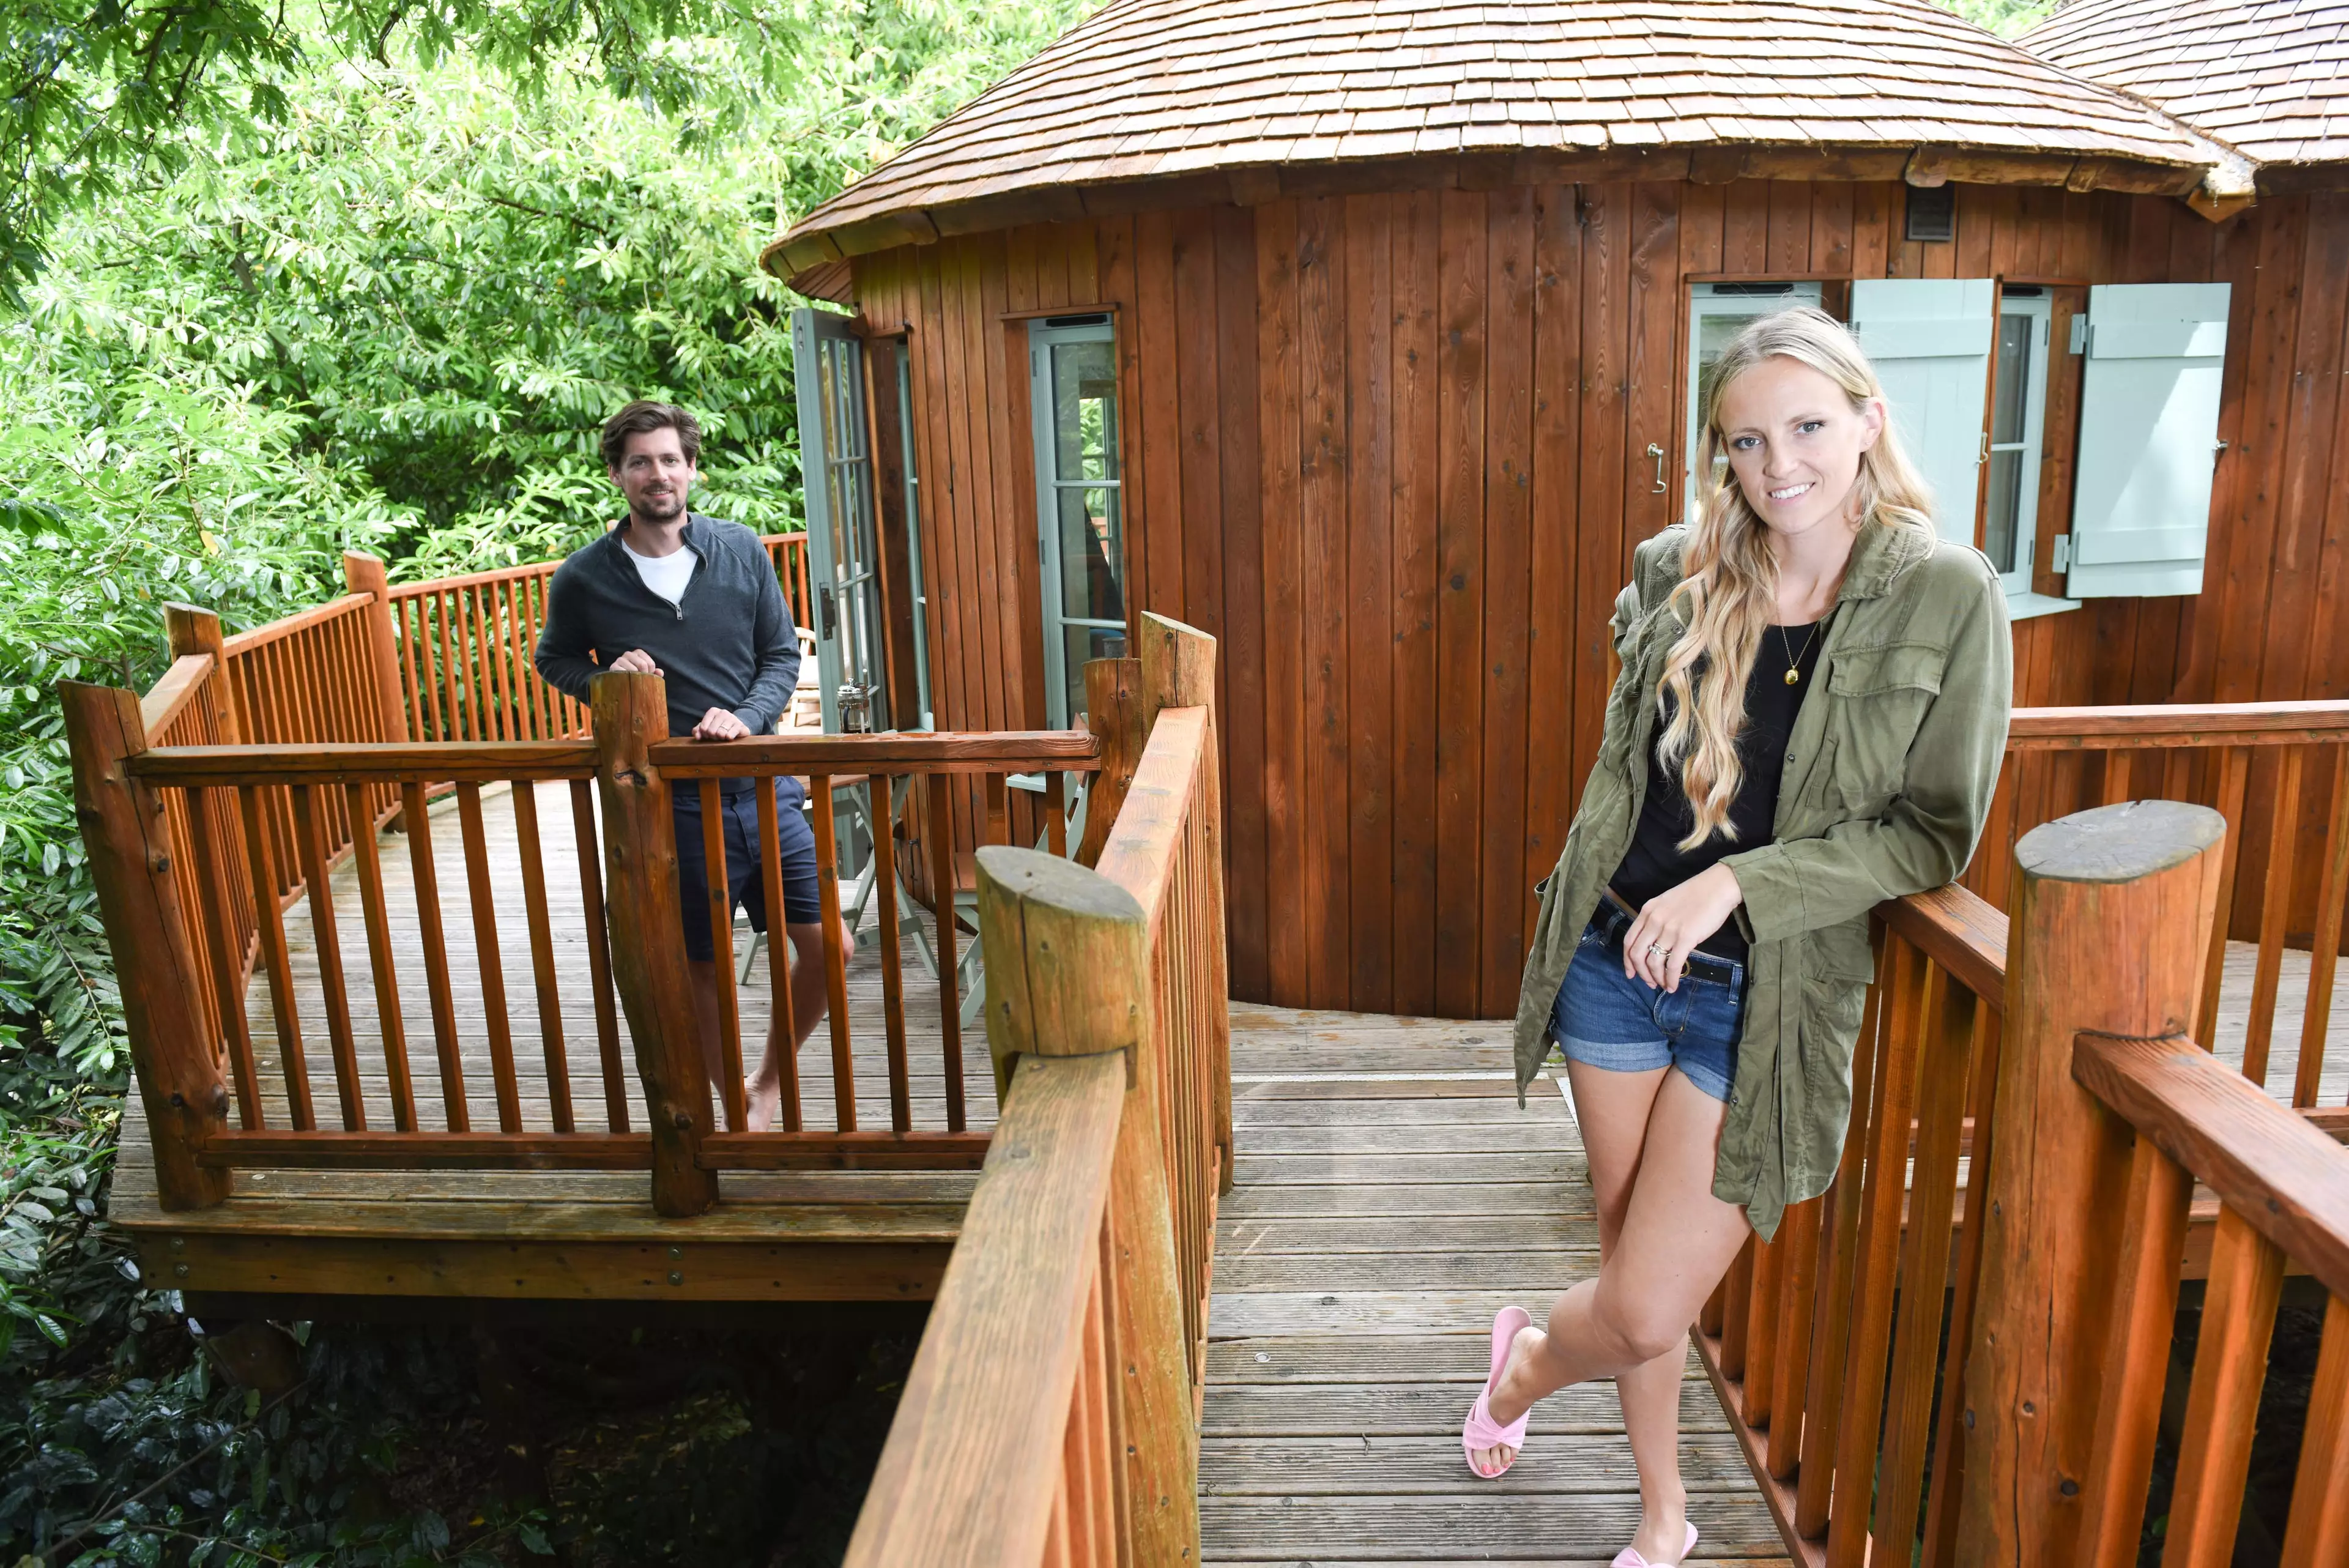 The couple have spent 13 weeks in a luxury treehouse (